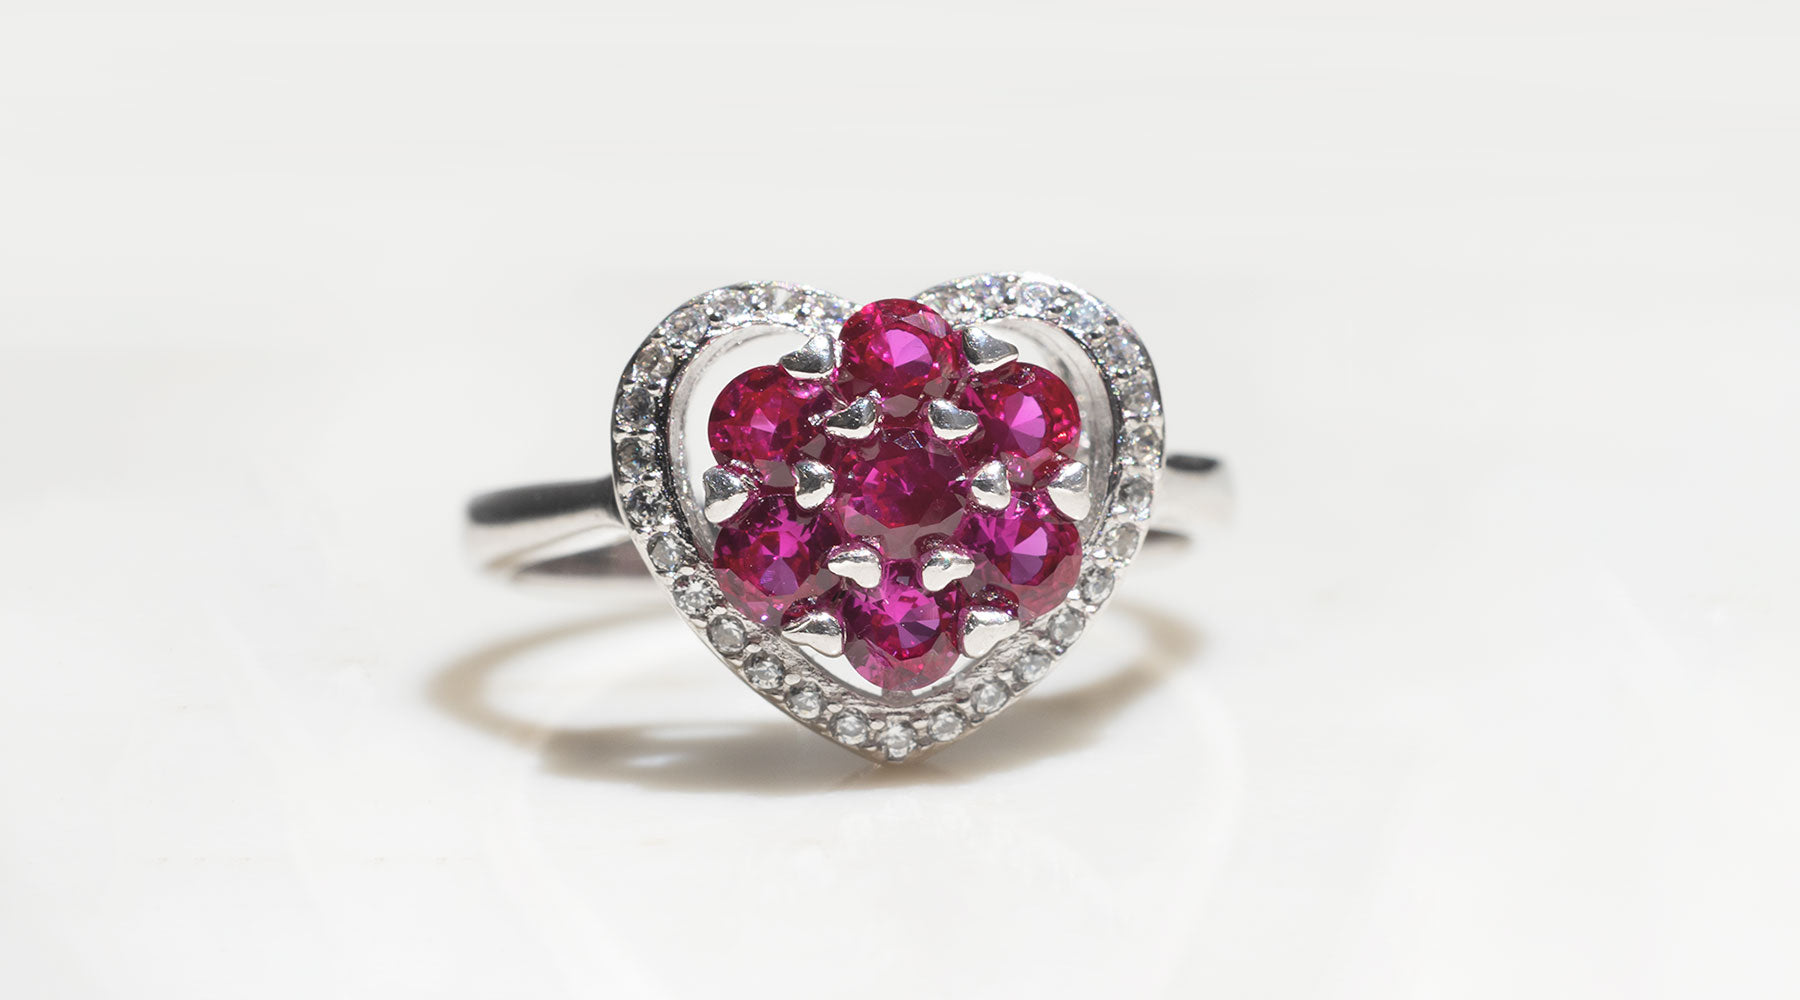 A white gold ring sits on a white surface.  The ring has a micro-grain set diamond heart-shaped setting.  In the center of the heart there is a cluster setting of seven round cut pigeon-blood rubies.  The rubies are held in place with heart shaped claws. 